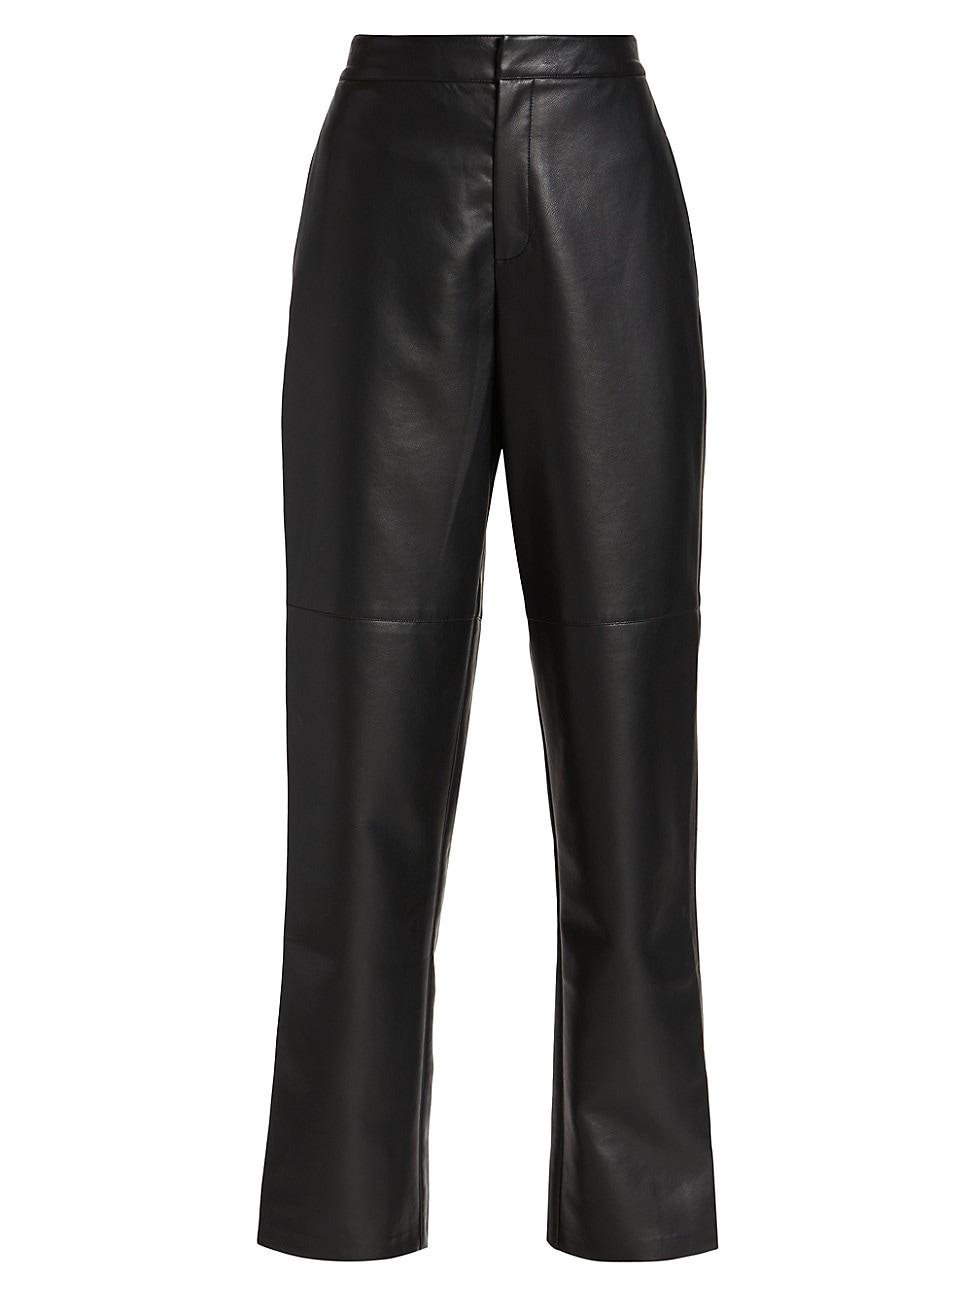 Wayf Robertson Faux Leather Pants in Black | Lyst